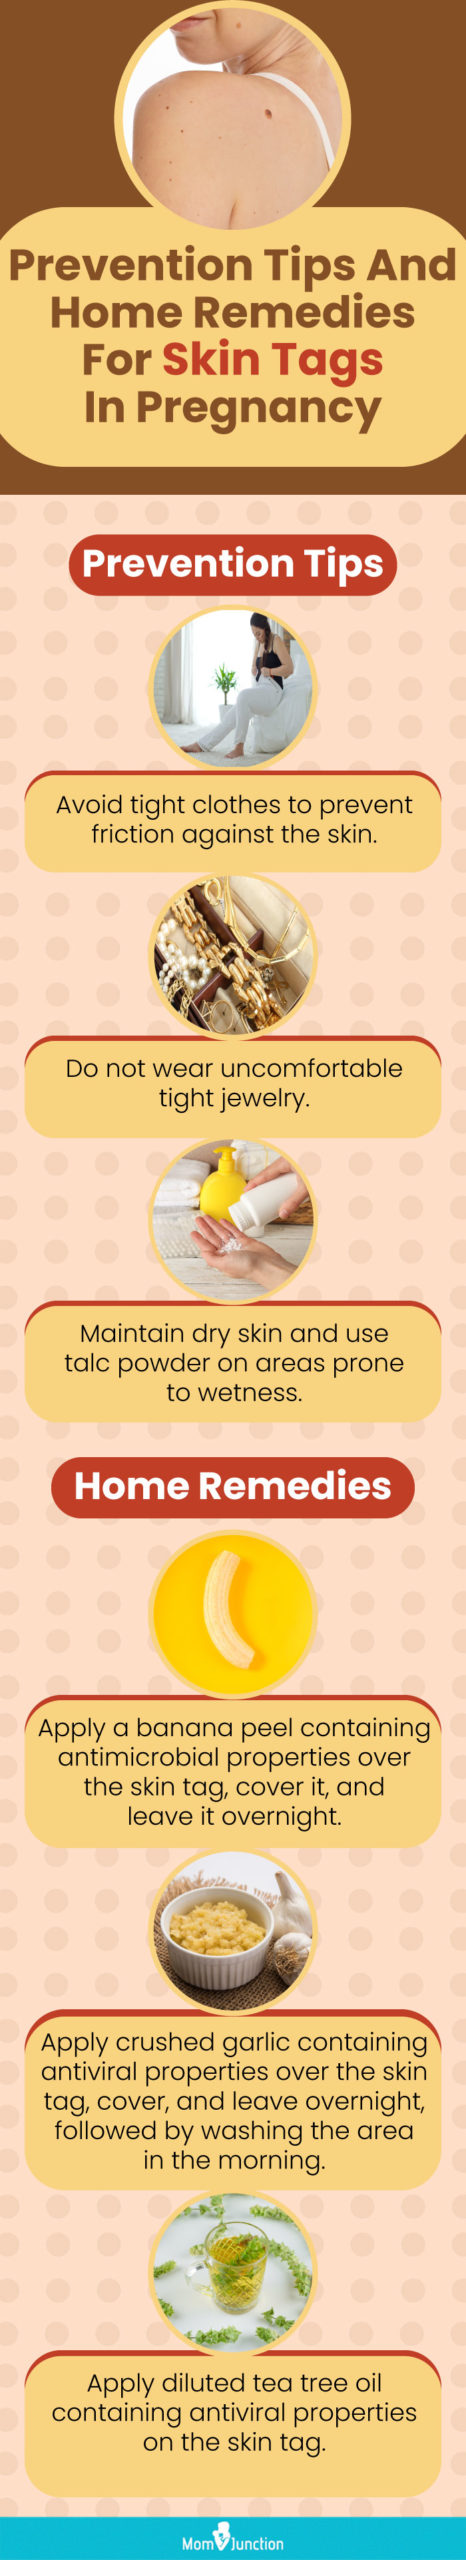 prevention tips and home remedies for skin tags in pregnancy [infographic]